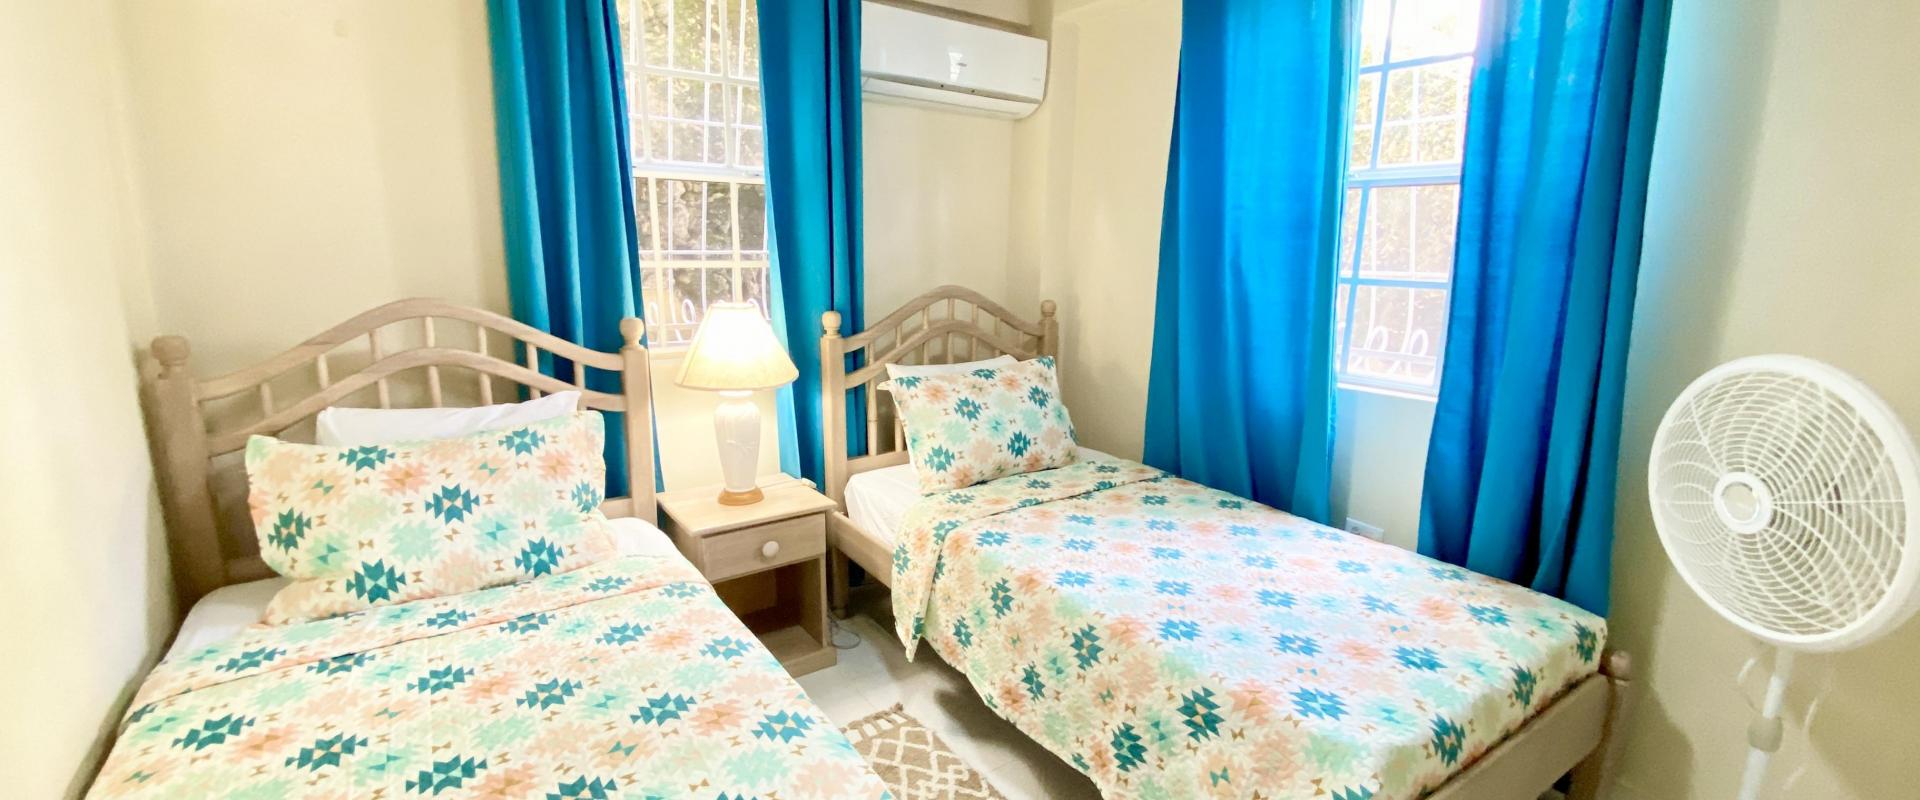 Heywoods 145 Barbados Vacation Rental Apartment Bedroom 2 with 2 Single Beds